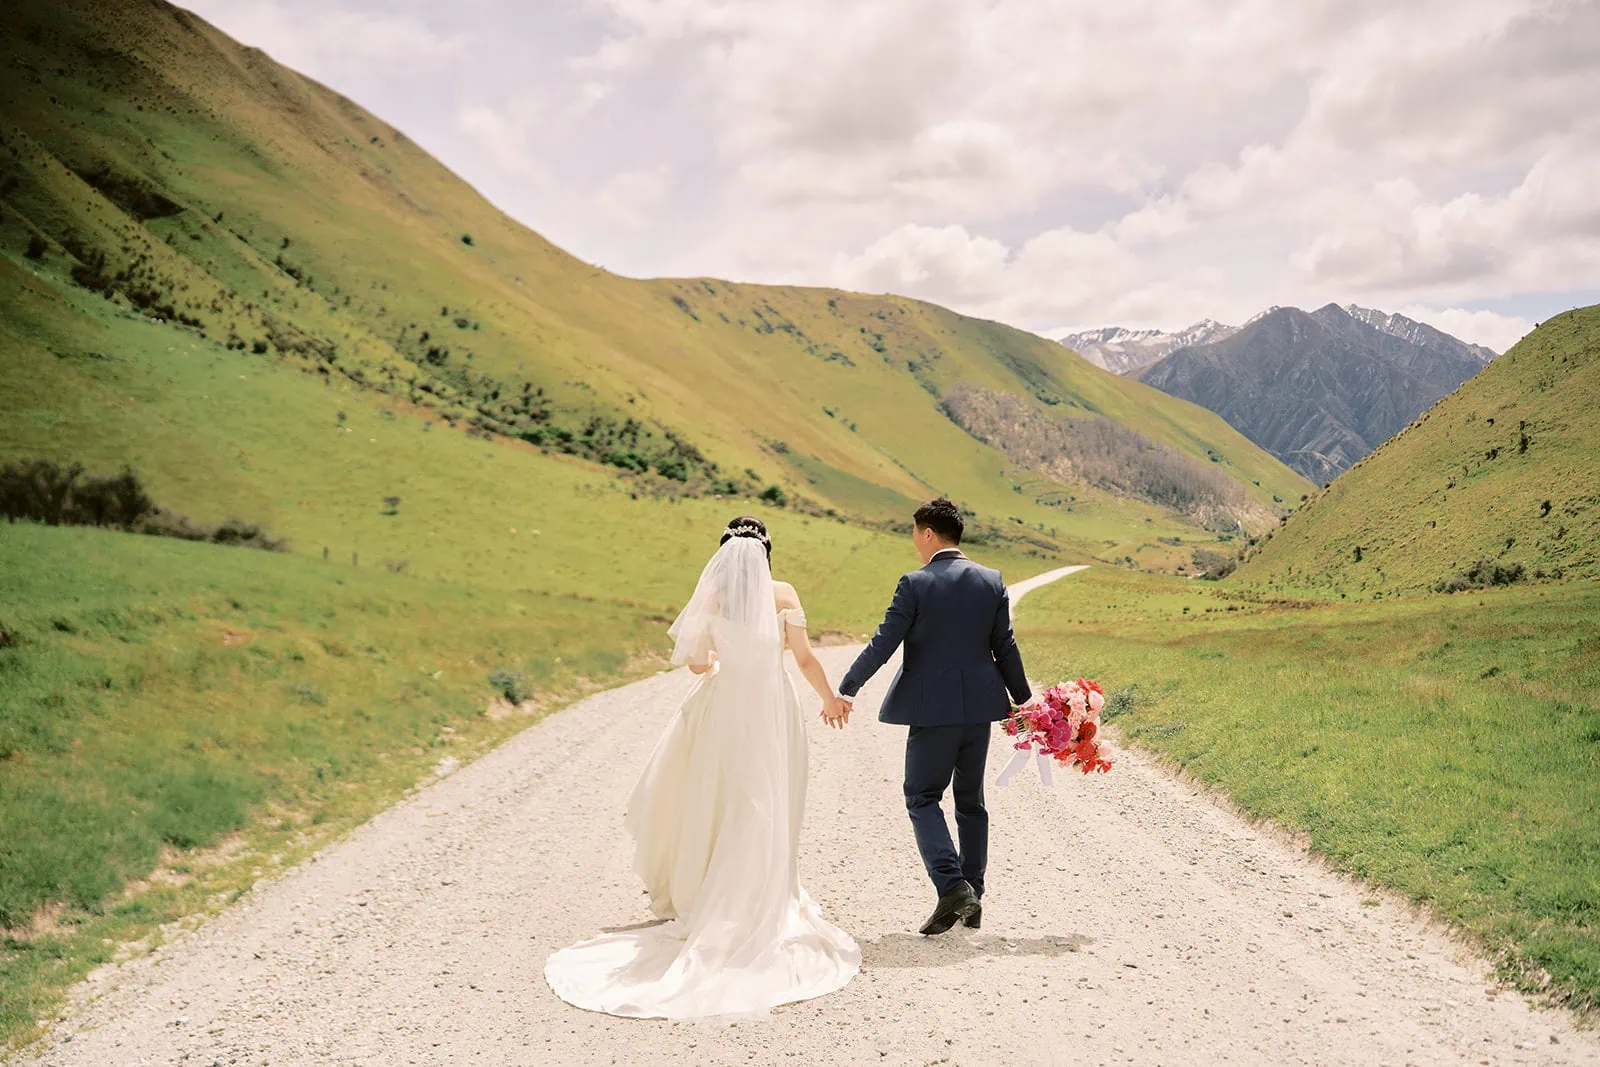 Queenstown Elopement Heli Wedding Photographer クイーンズタウン結婚式 | A bride and groom posing for their pre-wedding photoshoot on a dirt road in the mountains.